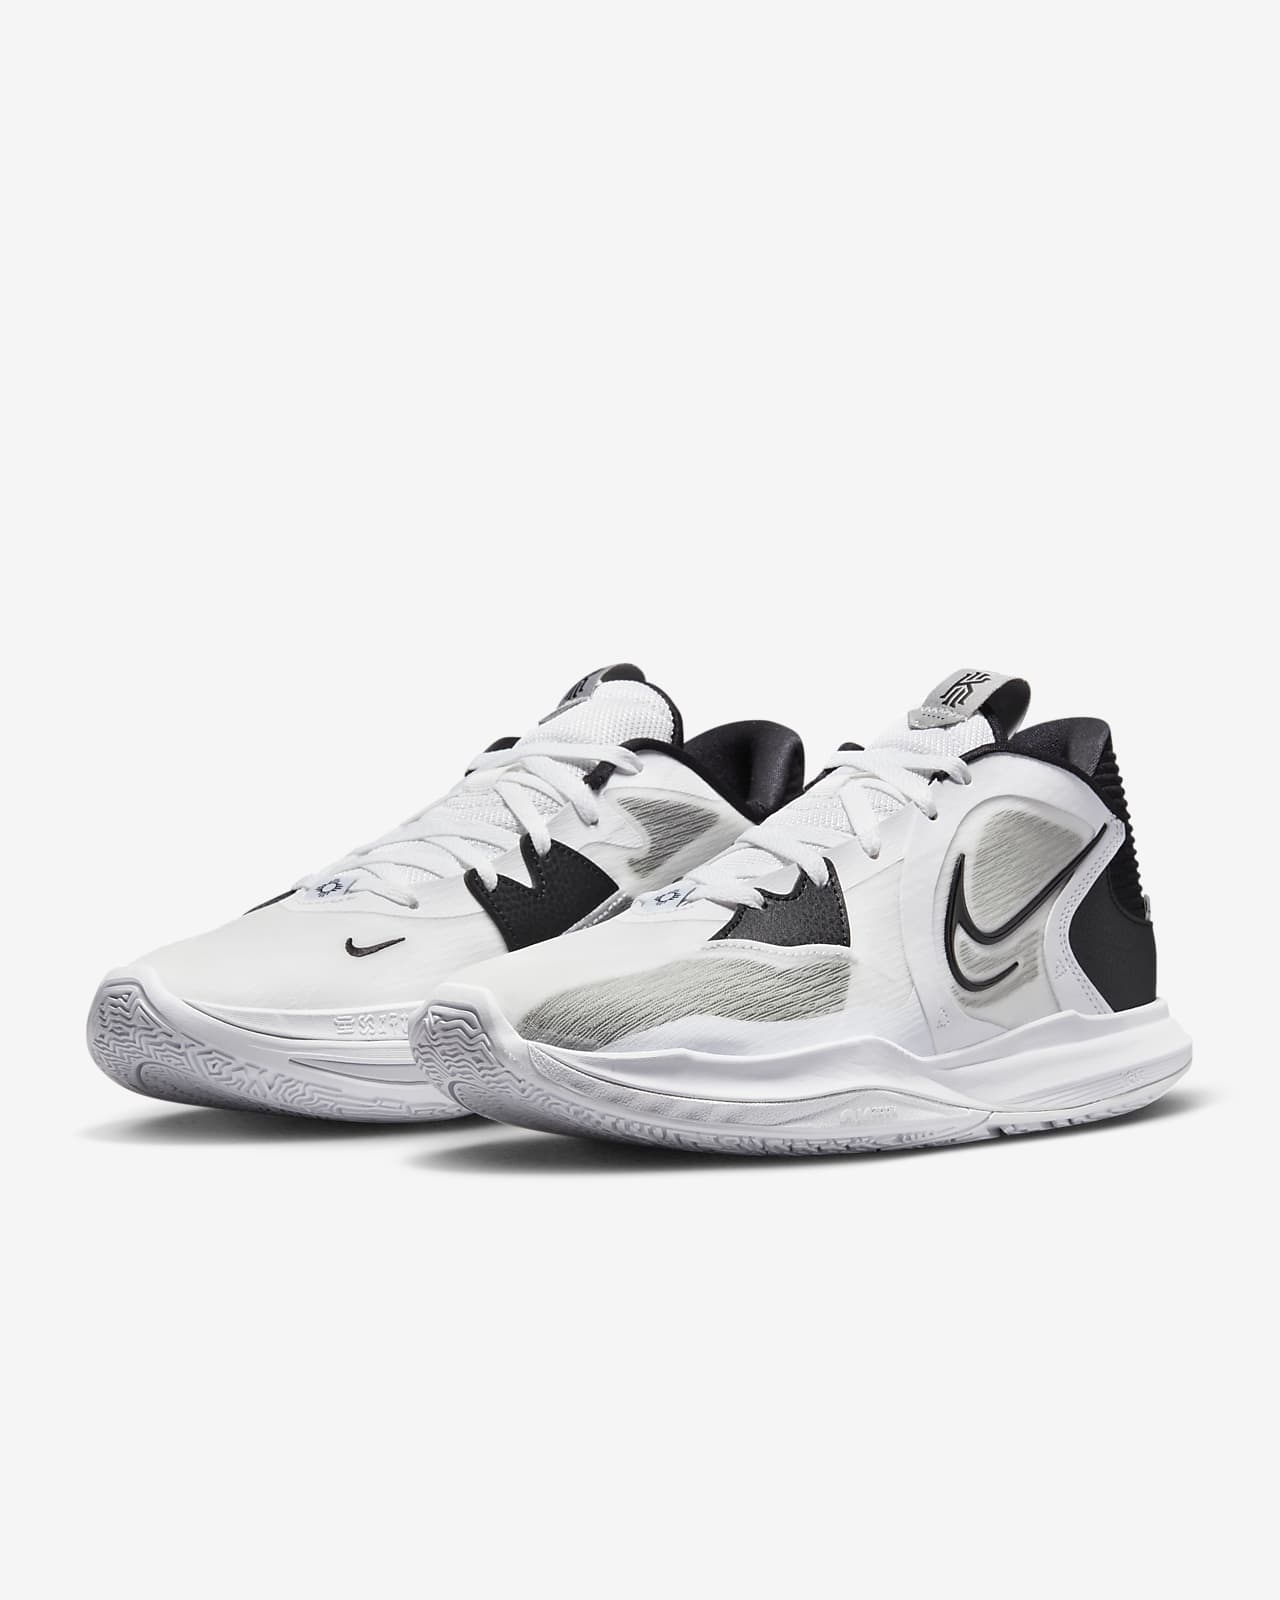 Kyrie Low 5 Basketball Shoes